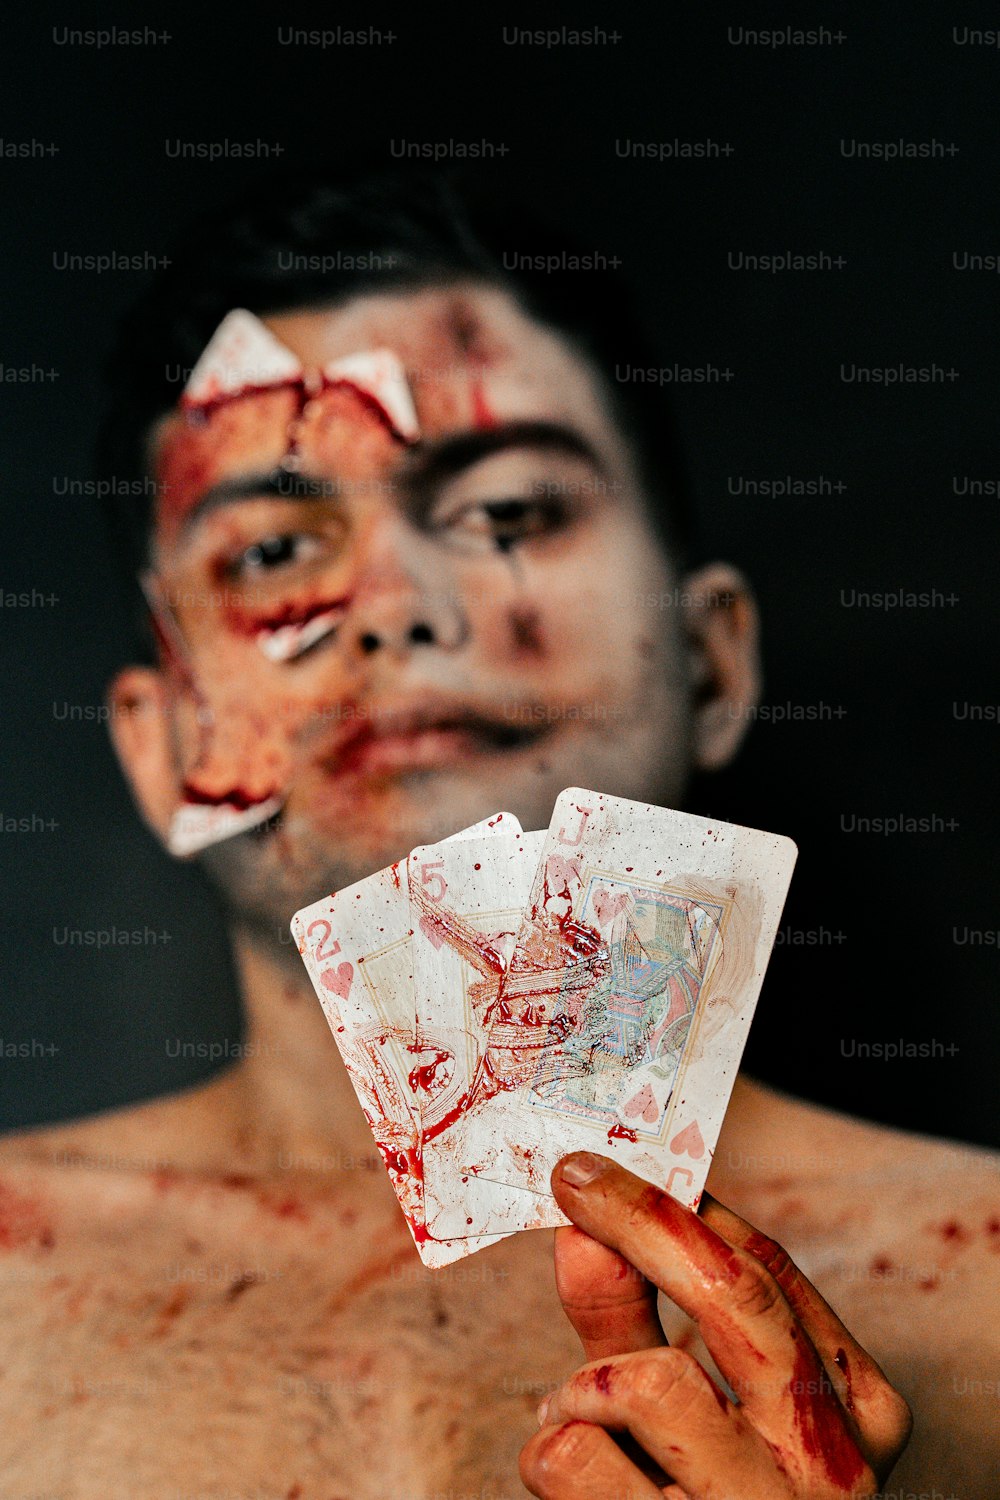 a man with blood all over his face holding a card